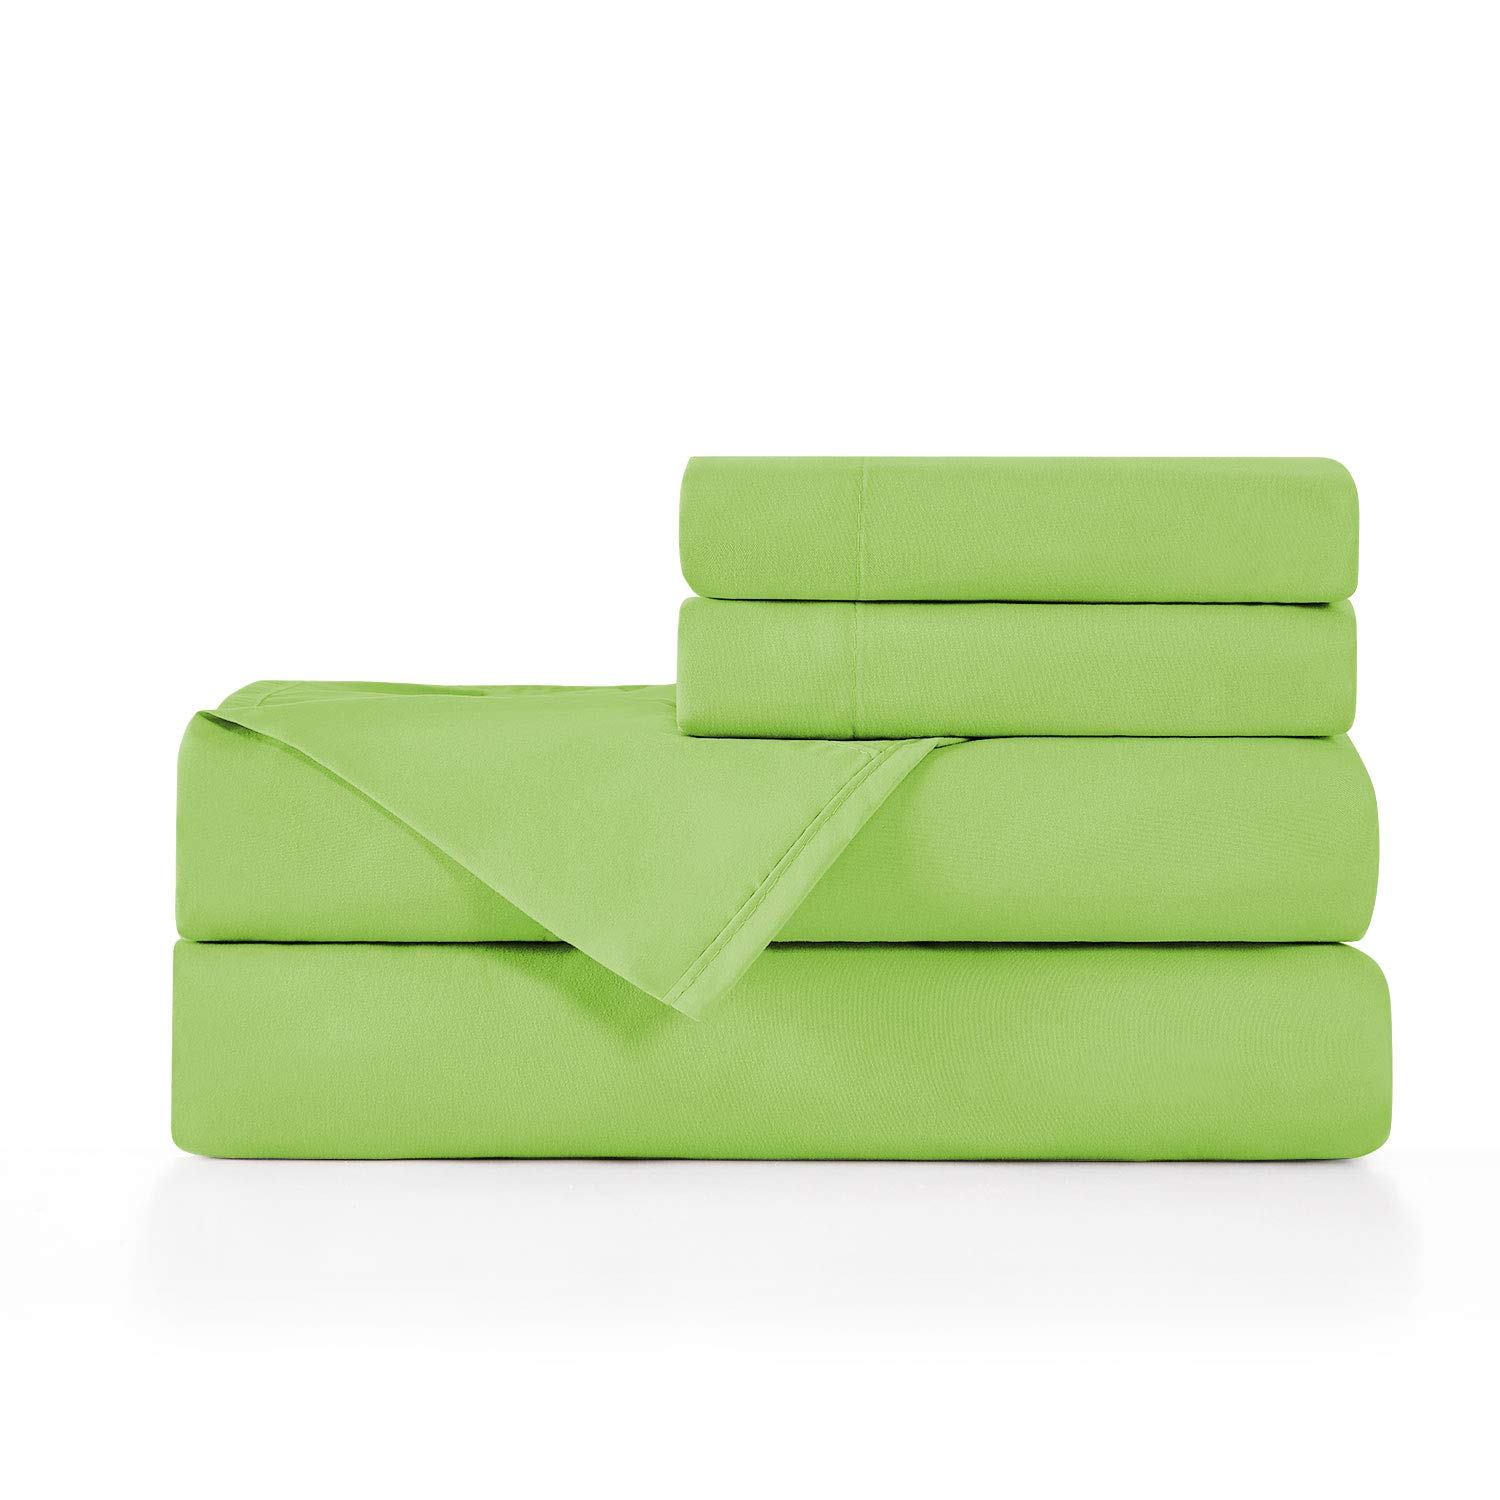 Book Cover BASIC CHOICE Brushed Microfiber Bed Sheet Set, Standard 100 by Oeko-Tex, Lime, Full, 4 Pieces Full Lime